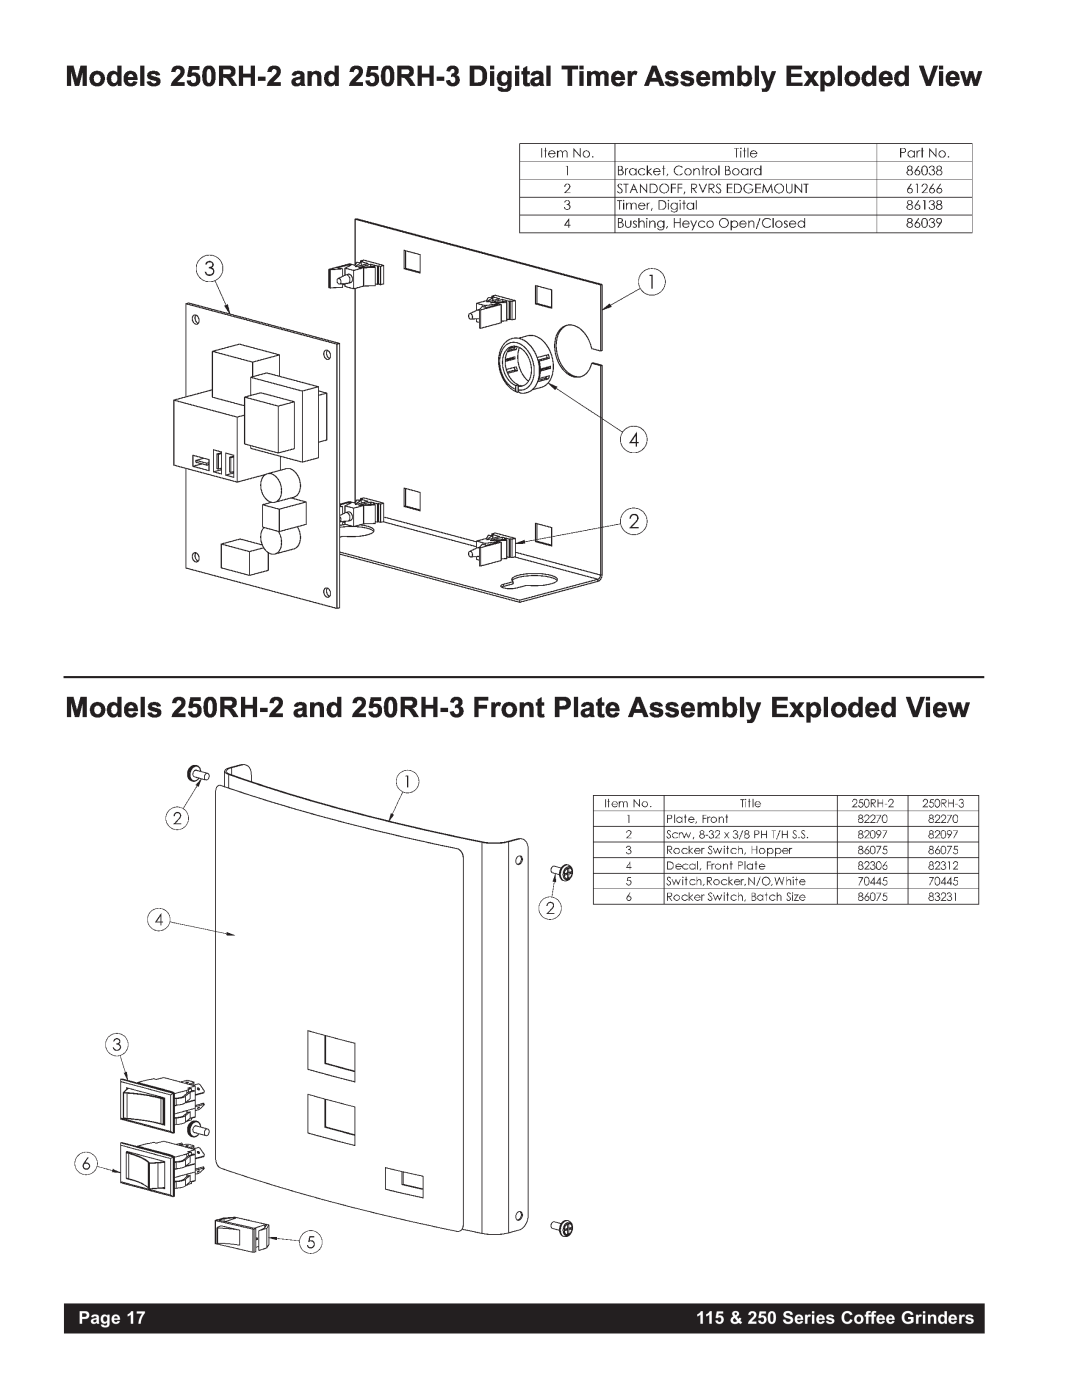 Grindmaster 115AB Models 250RH-2 and 250RH-3 Digital Timer Assembly Exploded View, Page, 115 & 250 Series Coffee Grinders 